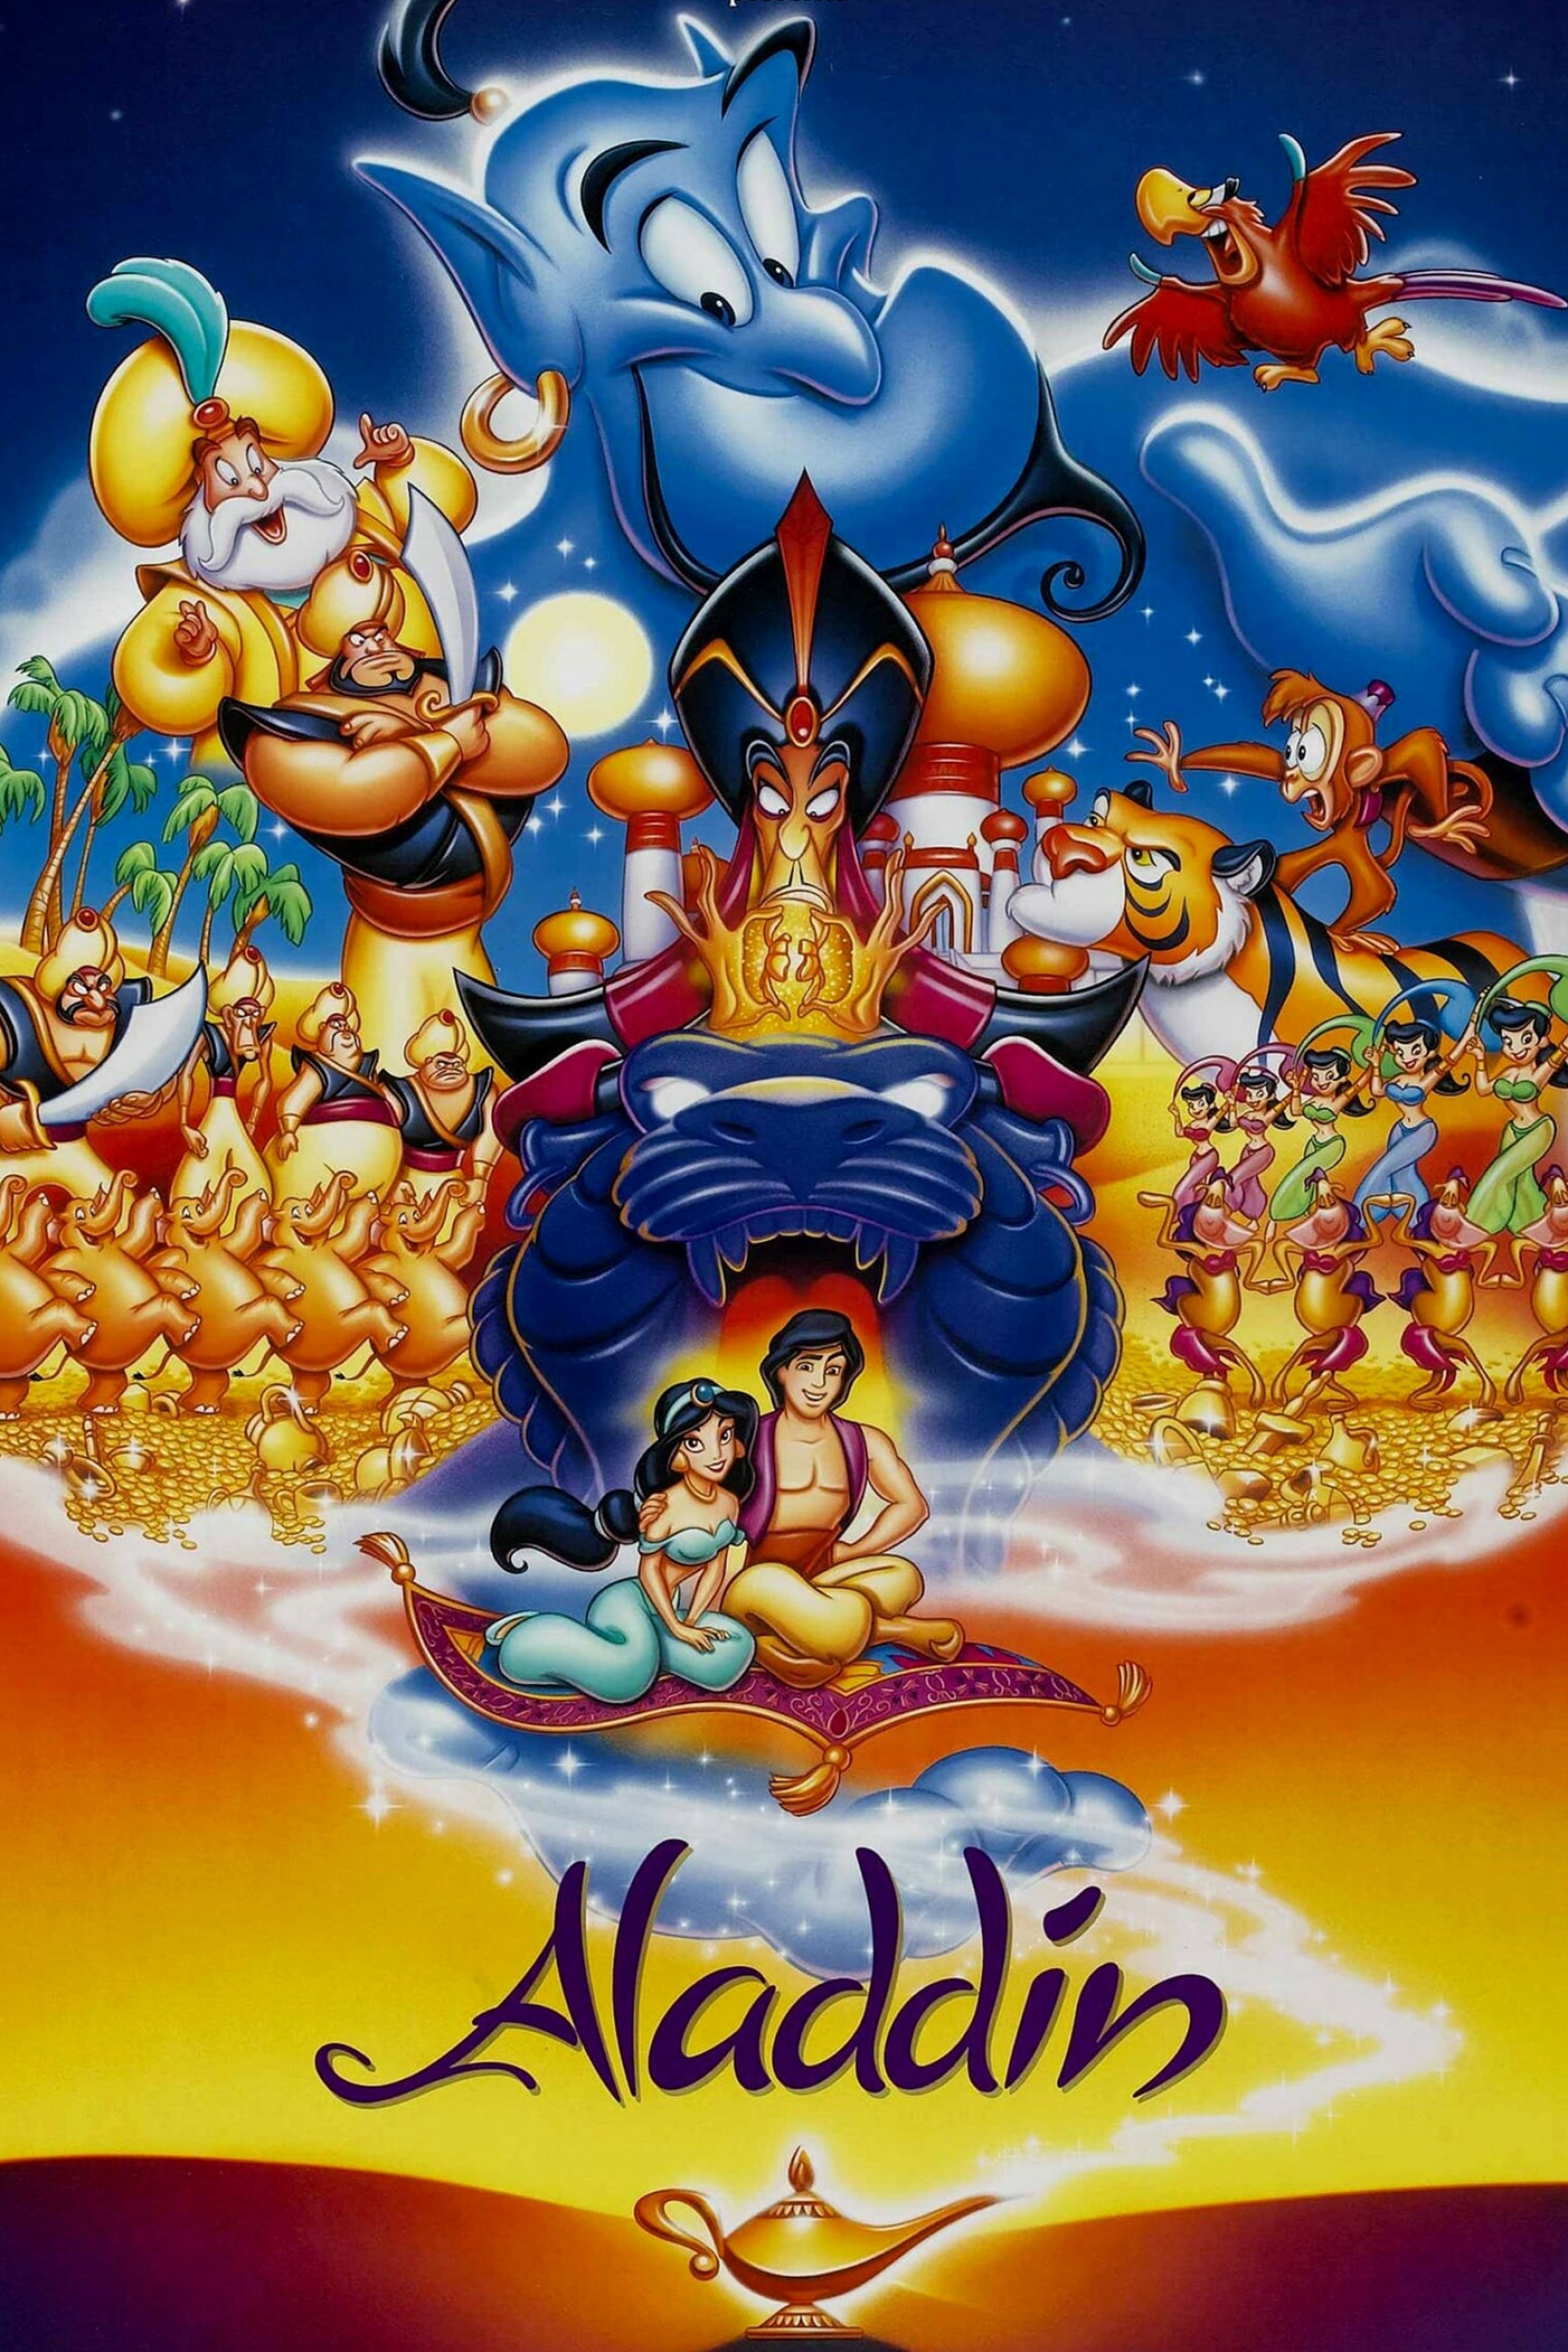 Aladdin (Cartoon): It was a commercial success, becoming the highest-grossing film of 1992 with an earning of over $504 million in worldwide box office revenue. 1670x2500 HD Wallpaper.